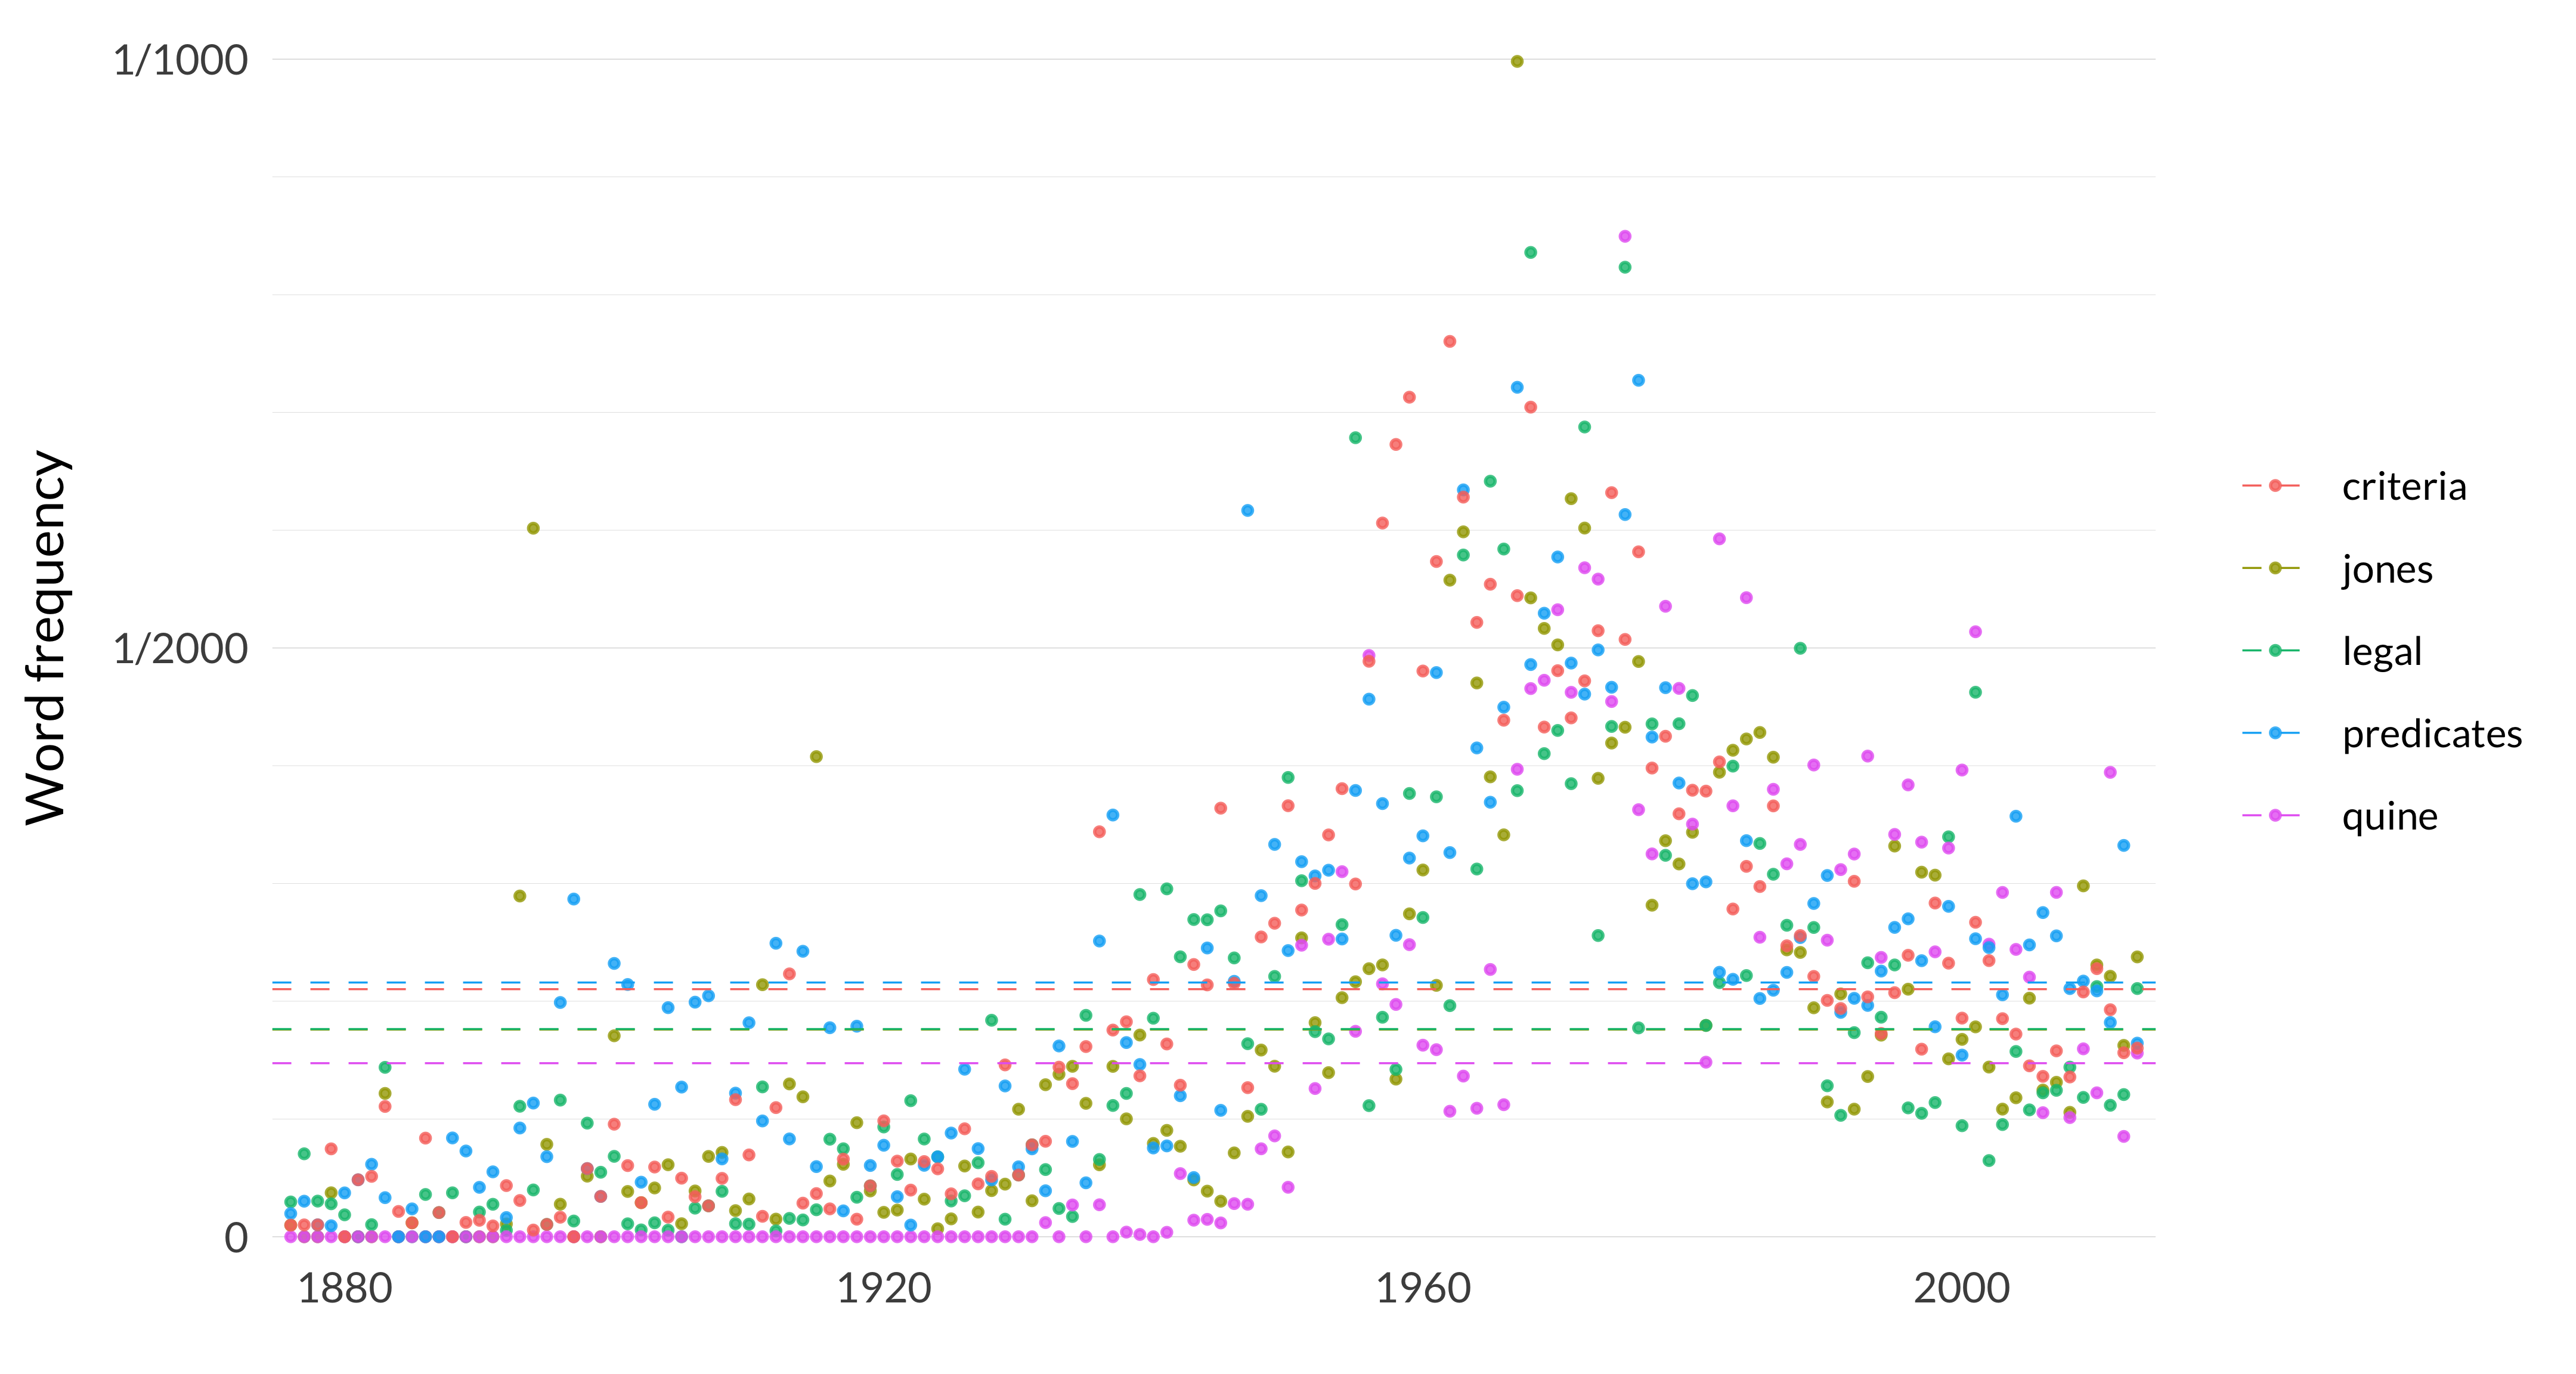 A scatterplot showing the frequency of the words jones, legal, quine, predicates, criteria. The word jones appears, on average across the years, 176 times per million words, and in the median year, it appears 130 times per million words. Its most frequent occurrence is in 1967 when it appears 998 times per million words, and its least frequent occurrence is in 1877 when it appears 0 times per million words. The word legal appears, on average across the years, 176 times per million words, and in the median year, it appears 117 times per million words. Its most frequent occurrence is in 1968 when it appears 836 times per million words, and its least frequent occurrence is in 1881 when it appears 0 times per million words. The word quine appears, on average across the years, 147 times per million words, and in the median year, it appears 28 times per million words. Its most frequent occurrence is in 1975 when it appears 850 times per million words, and its least frequent occurrence is in 1876 when it appears 0 times per million words. The word predicates appears, on average across the years, 216 times per million words, and in the median year, it appears 204 times per million words. Its most frequent occurrence is in 1976 when it appears 727 times per million words, and its least frequent occurrence is in 1884 when it appears 0 times per million words. The word criteria appears, on average across the years, 210 times per million words, and in the median year, it appears 163 times per million words. Its most frequent occurrence is in 1962 when it appears 760 times per million words, and its least frequent occurrence is in 1880 when it appears 0 times per million words. 